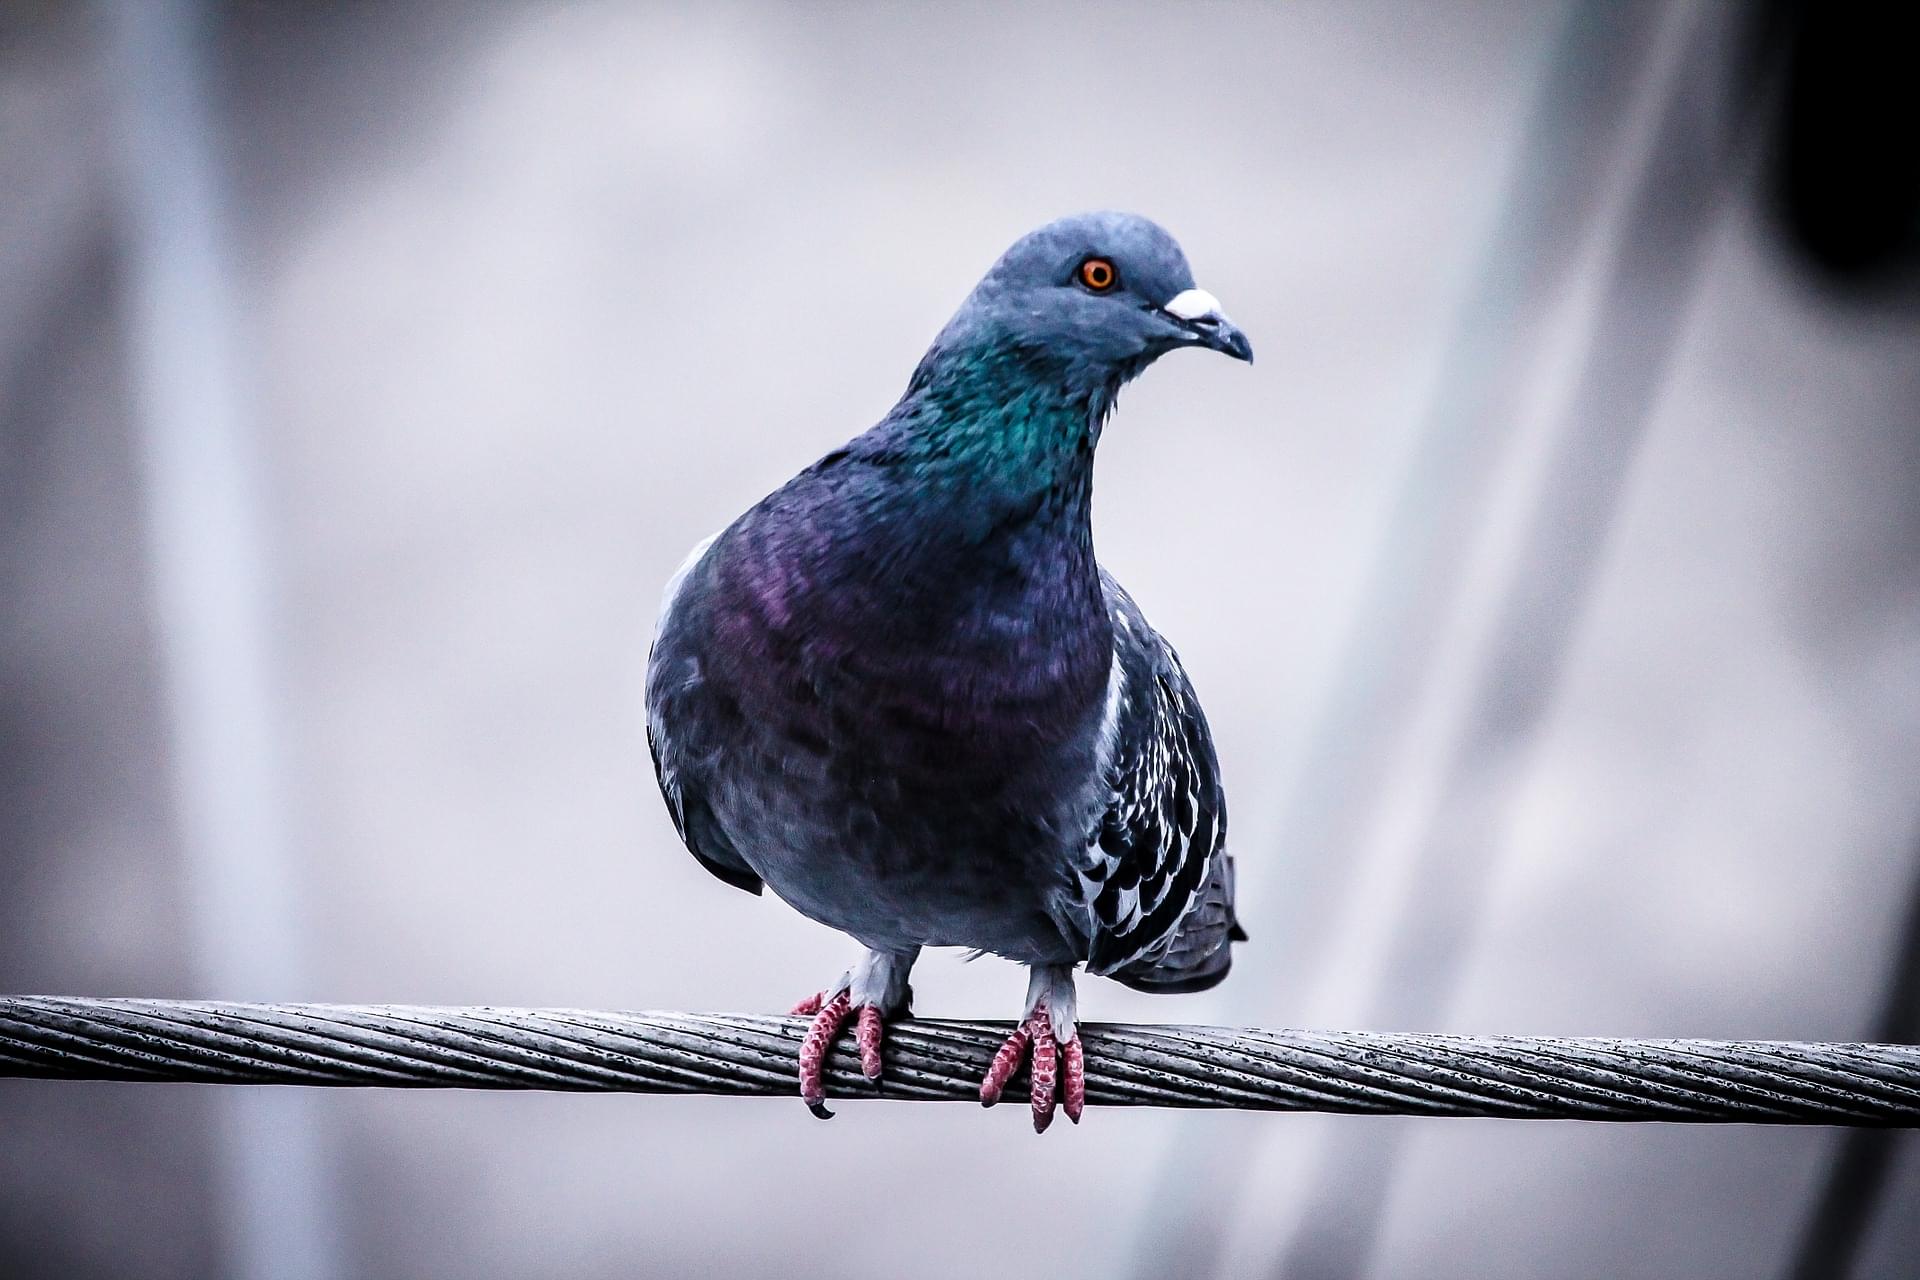 Pigeon Called “One Of The Best Ever” Sold At Auction For Over $1 Million [Photo]